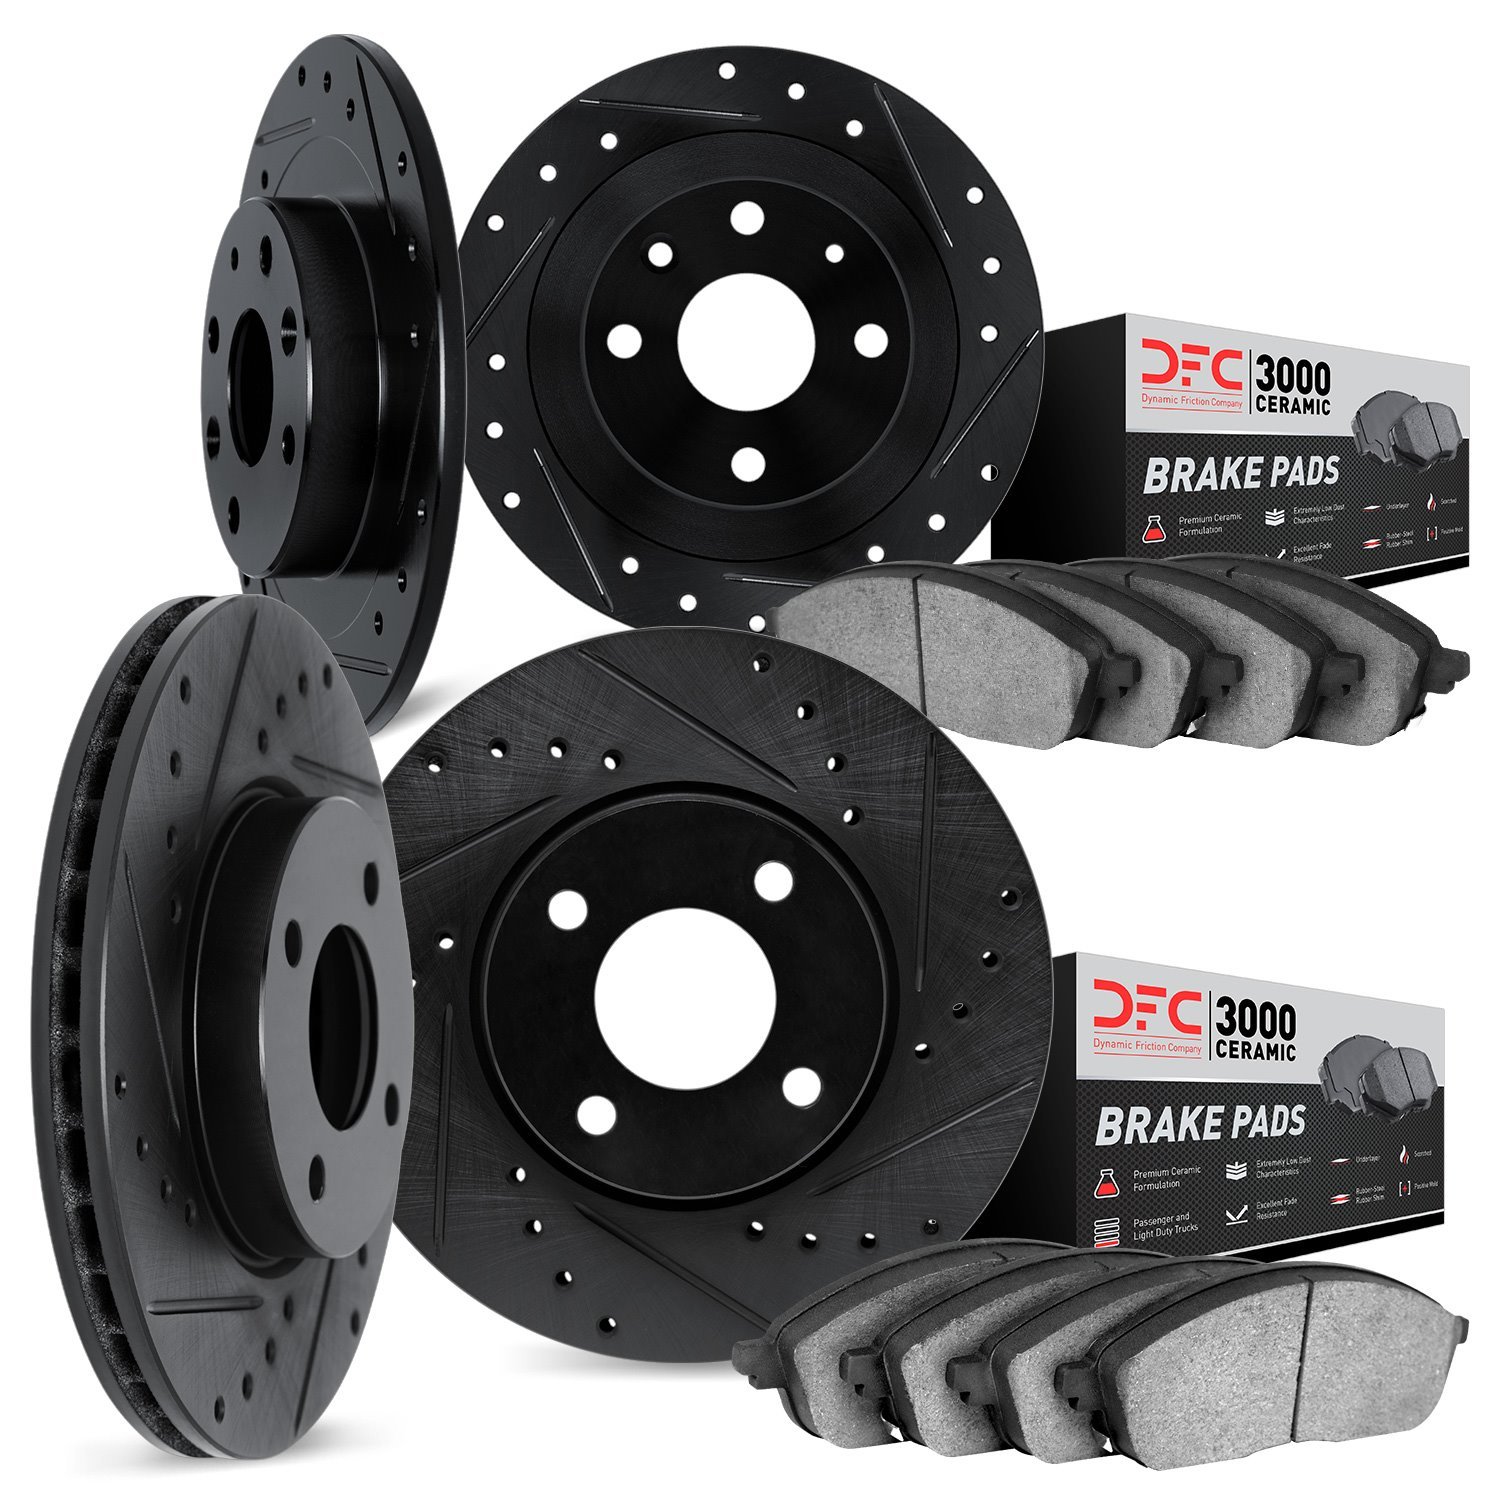 8304-92006 Drilled/Slotted Brake Rotors with 3000-Series Ceramic Brake Pads Kit [Black], 2013-2017 Suzuki, Position: Front and R